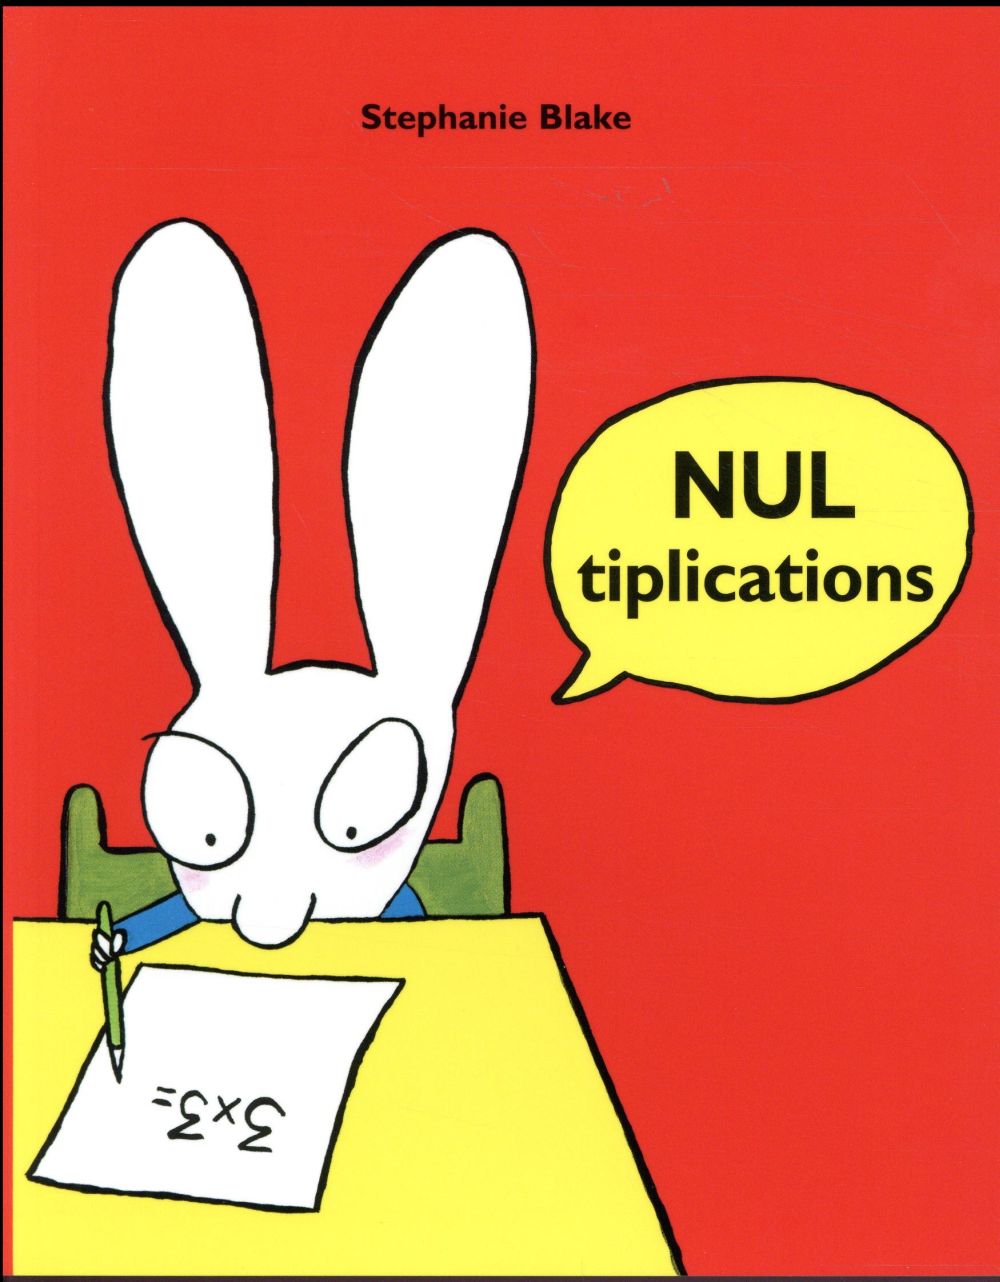 NULTIPLICATIONS